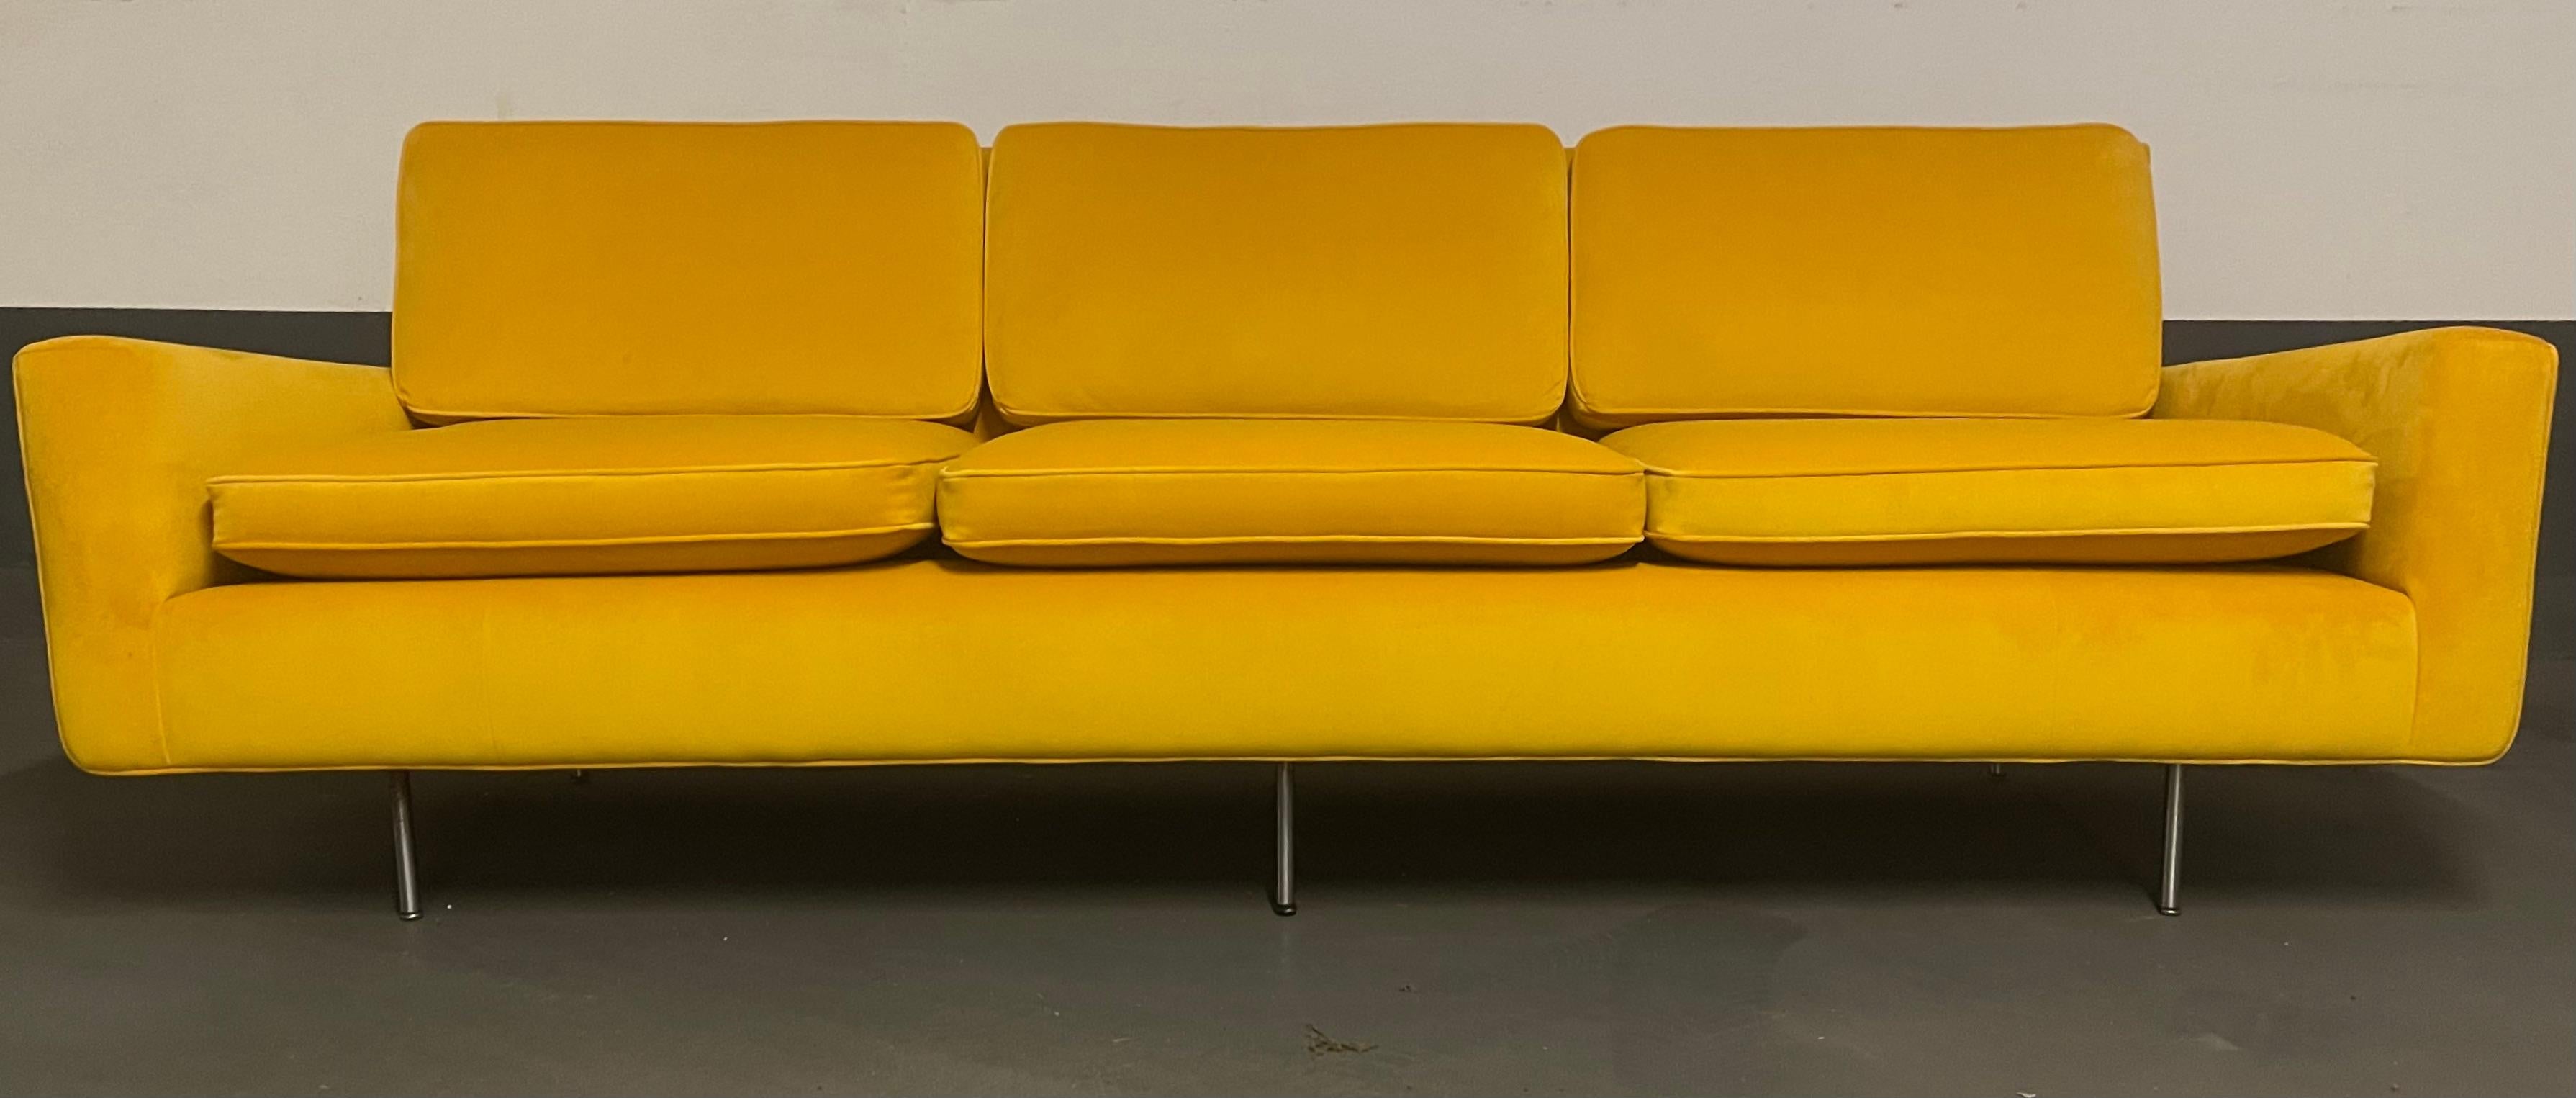 Rare no.26 by florence knoll in showroom condition. Hardly used only re-upholstered and used one time for a photo shooting and very exclusive model redone with very cosy fabric in warm yellow.